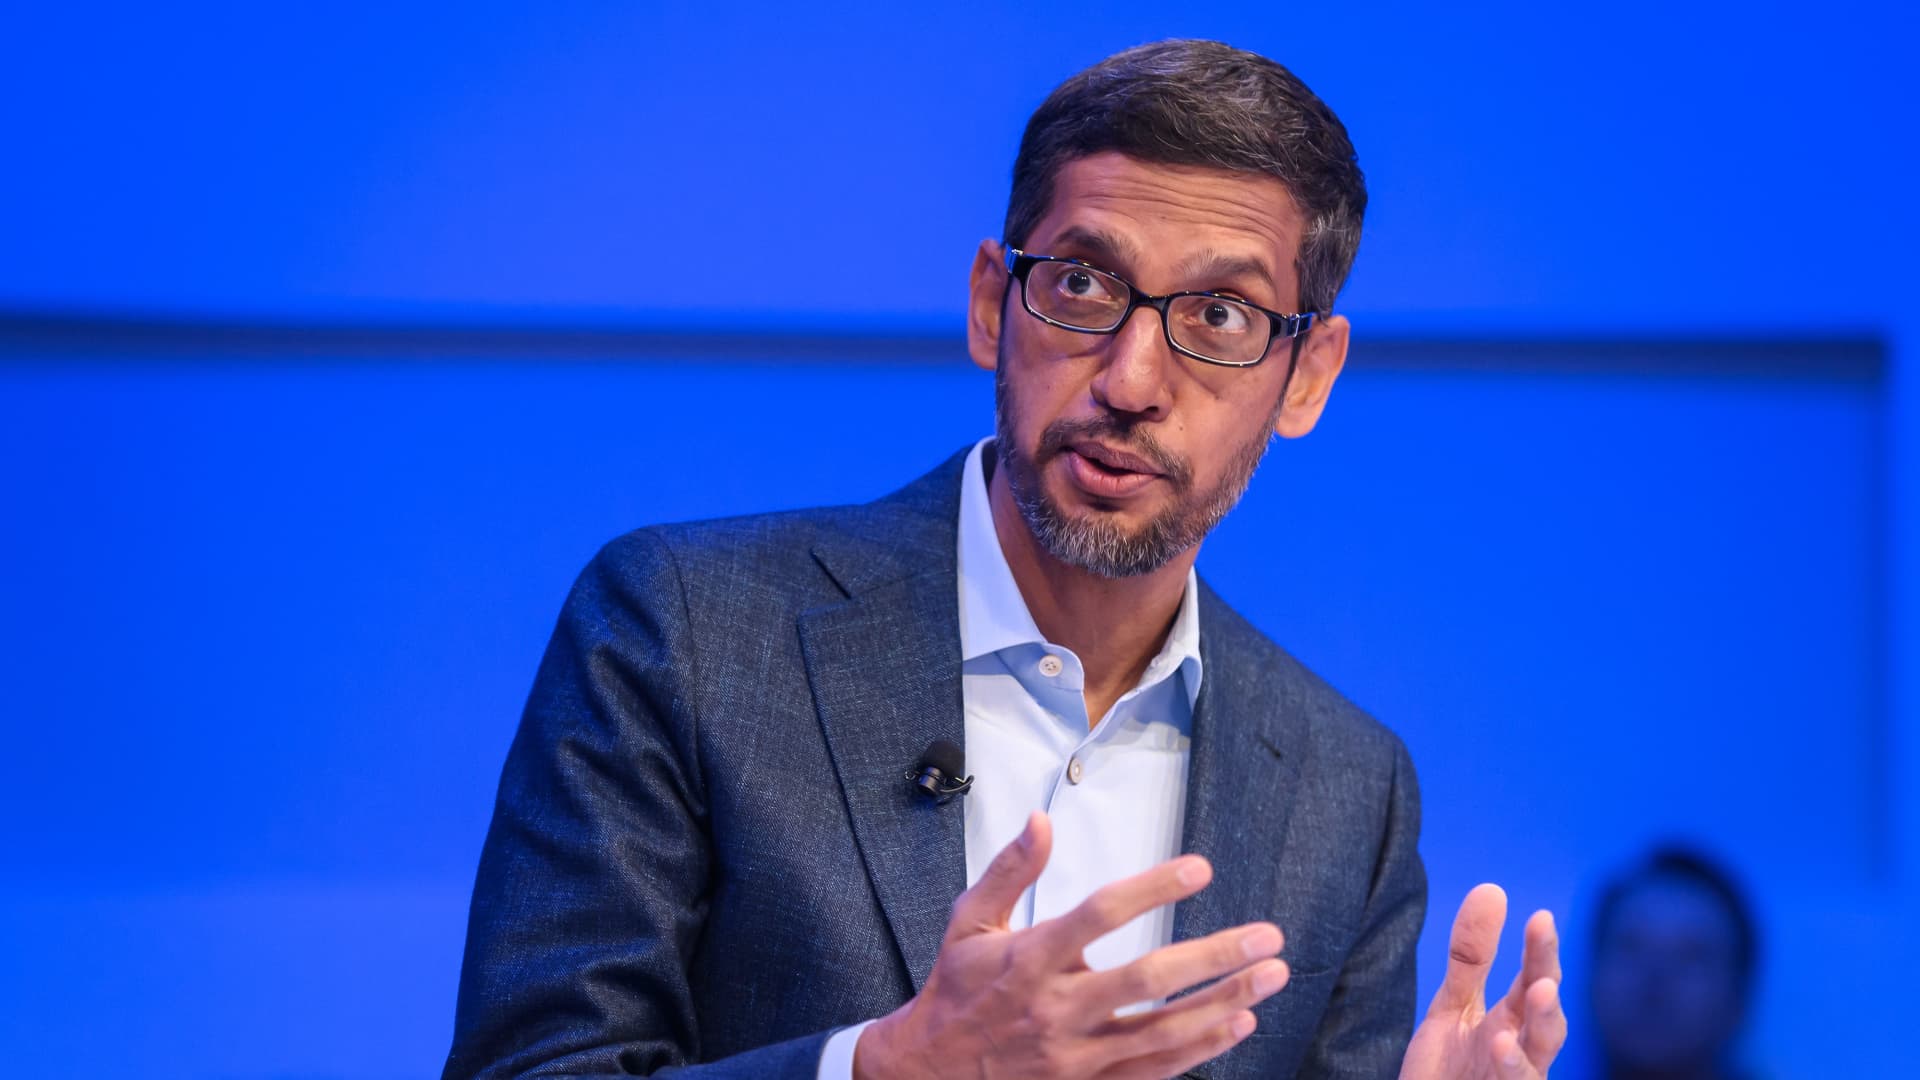 As Google tries to navigate an unfamiliar environment of slowing growth, cost cutting and employee dissent over cultural changes, CEO Sundar Pichai is